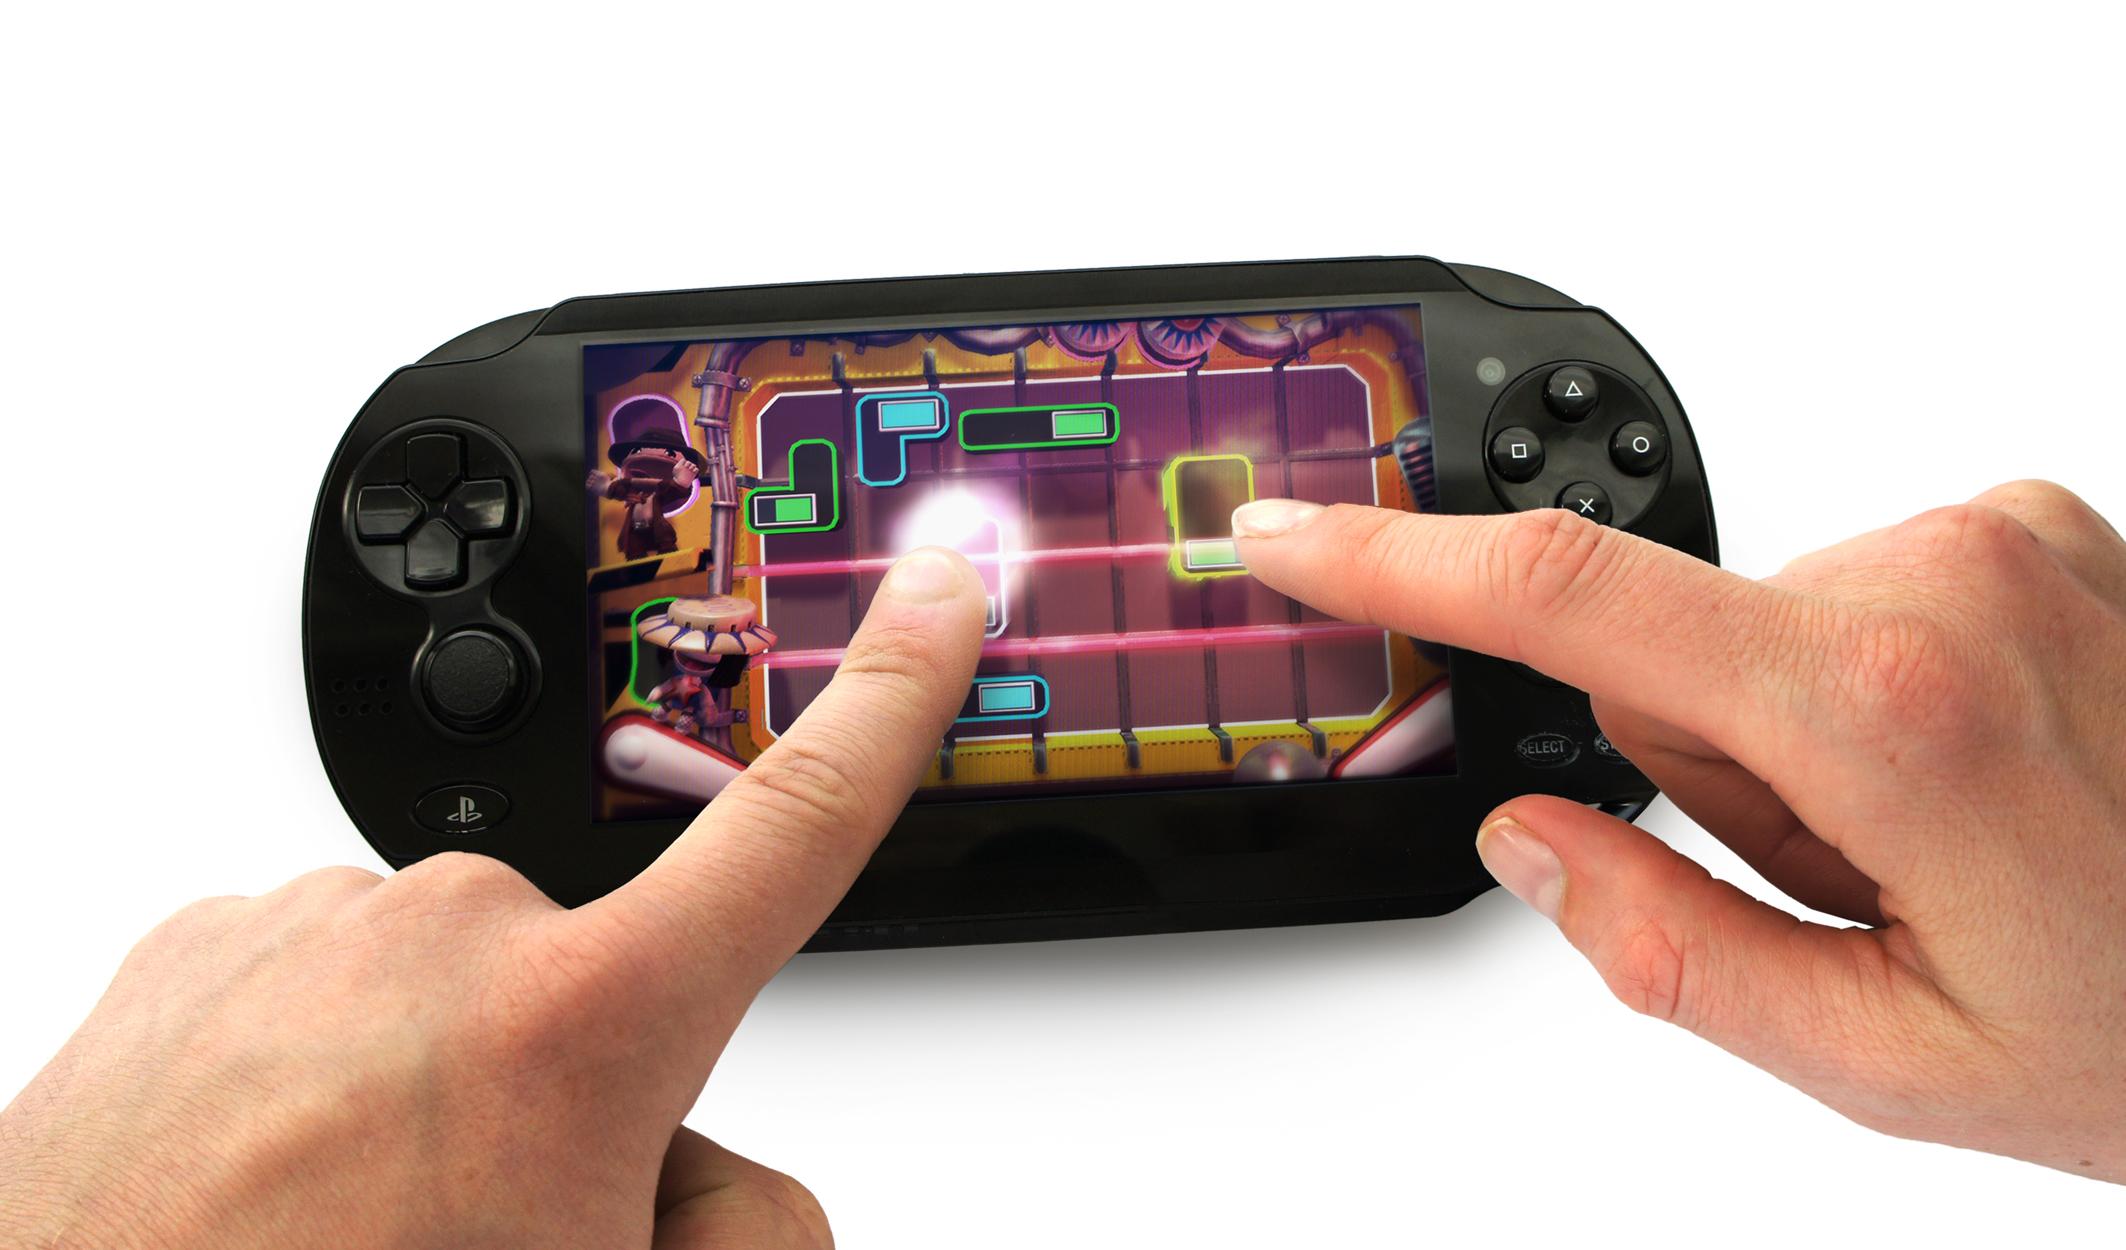 The Best PS Vita of All Time | Digital Trends